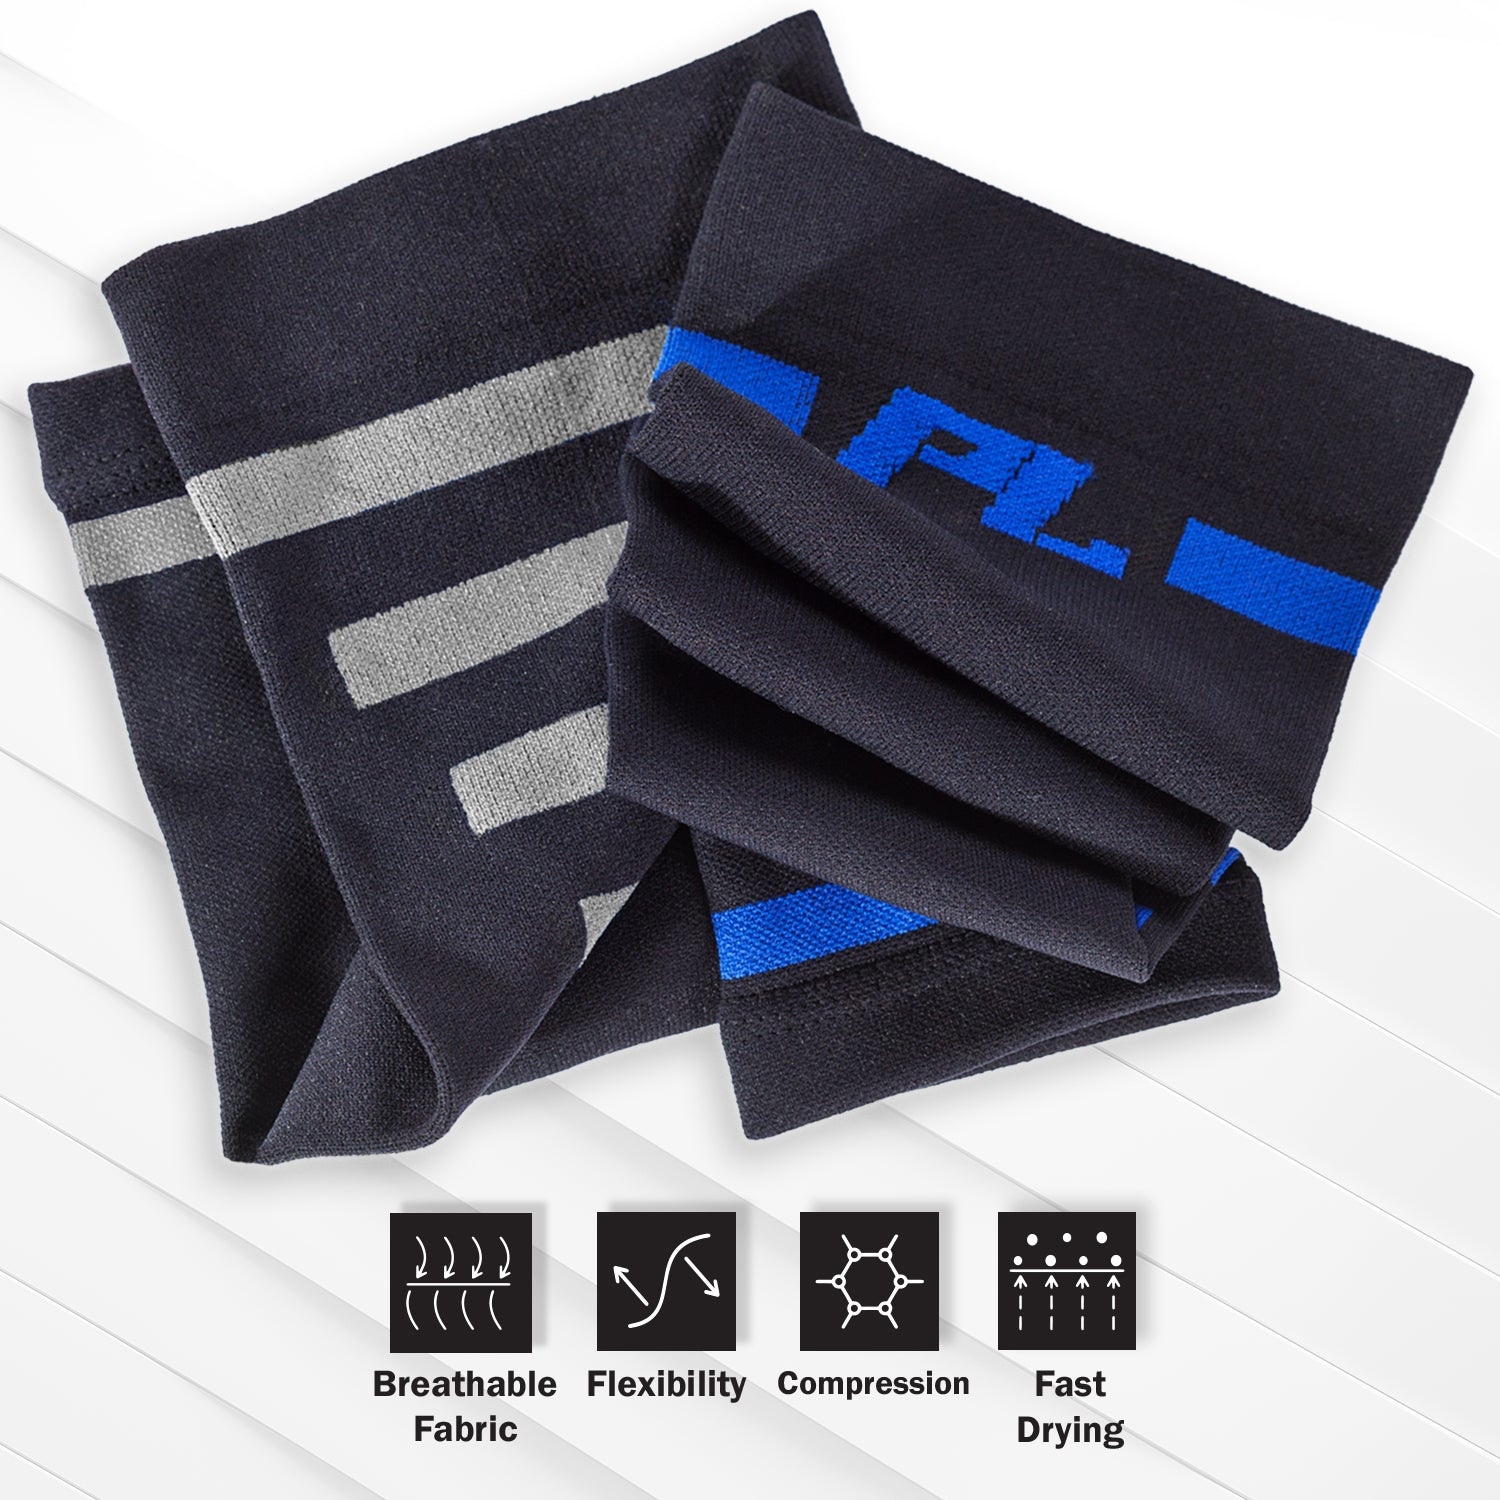 a group of black and blue socks with text: 'FL Breathable Flexibility Compression Fast Fabric Drying'